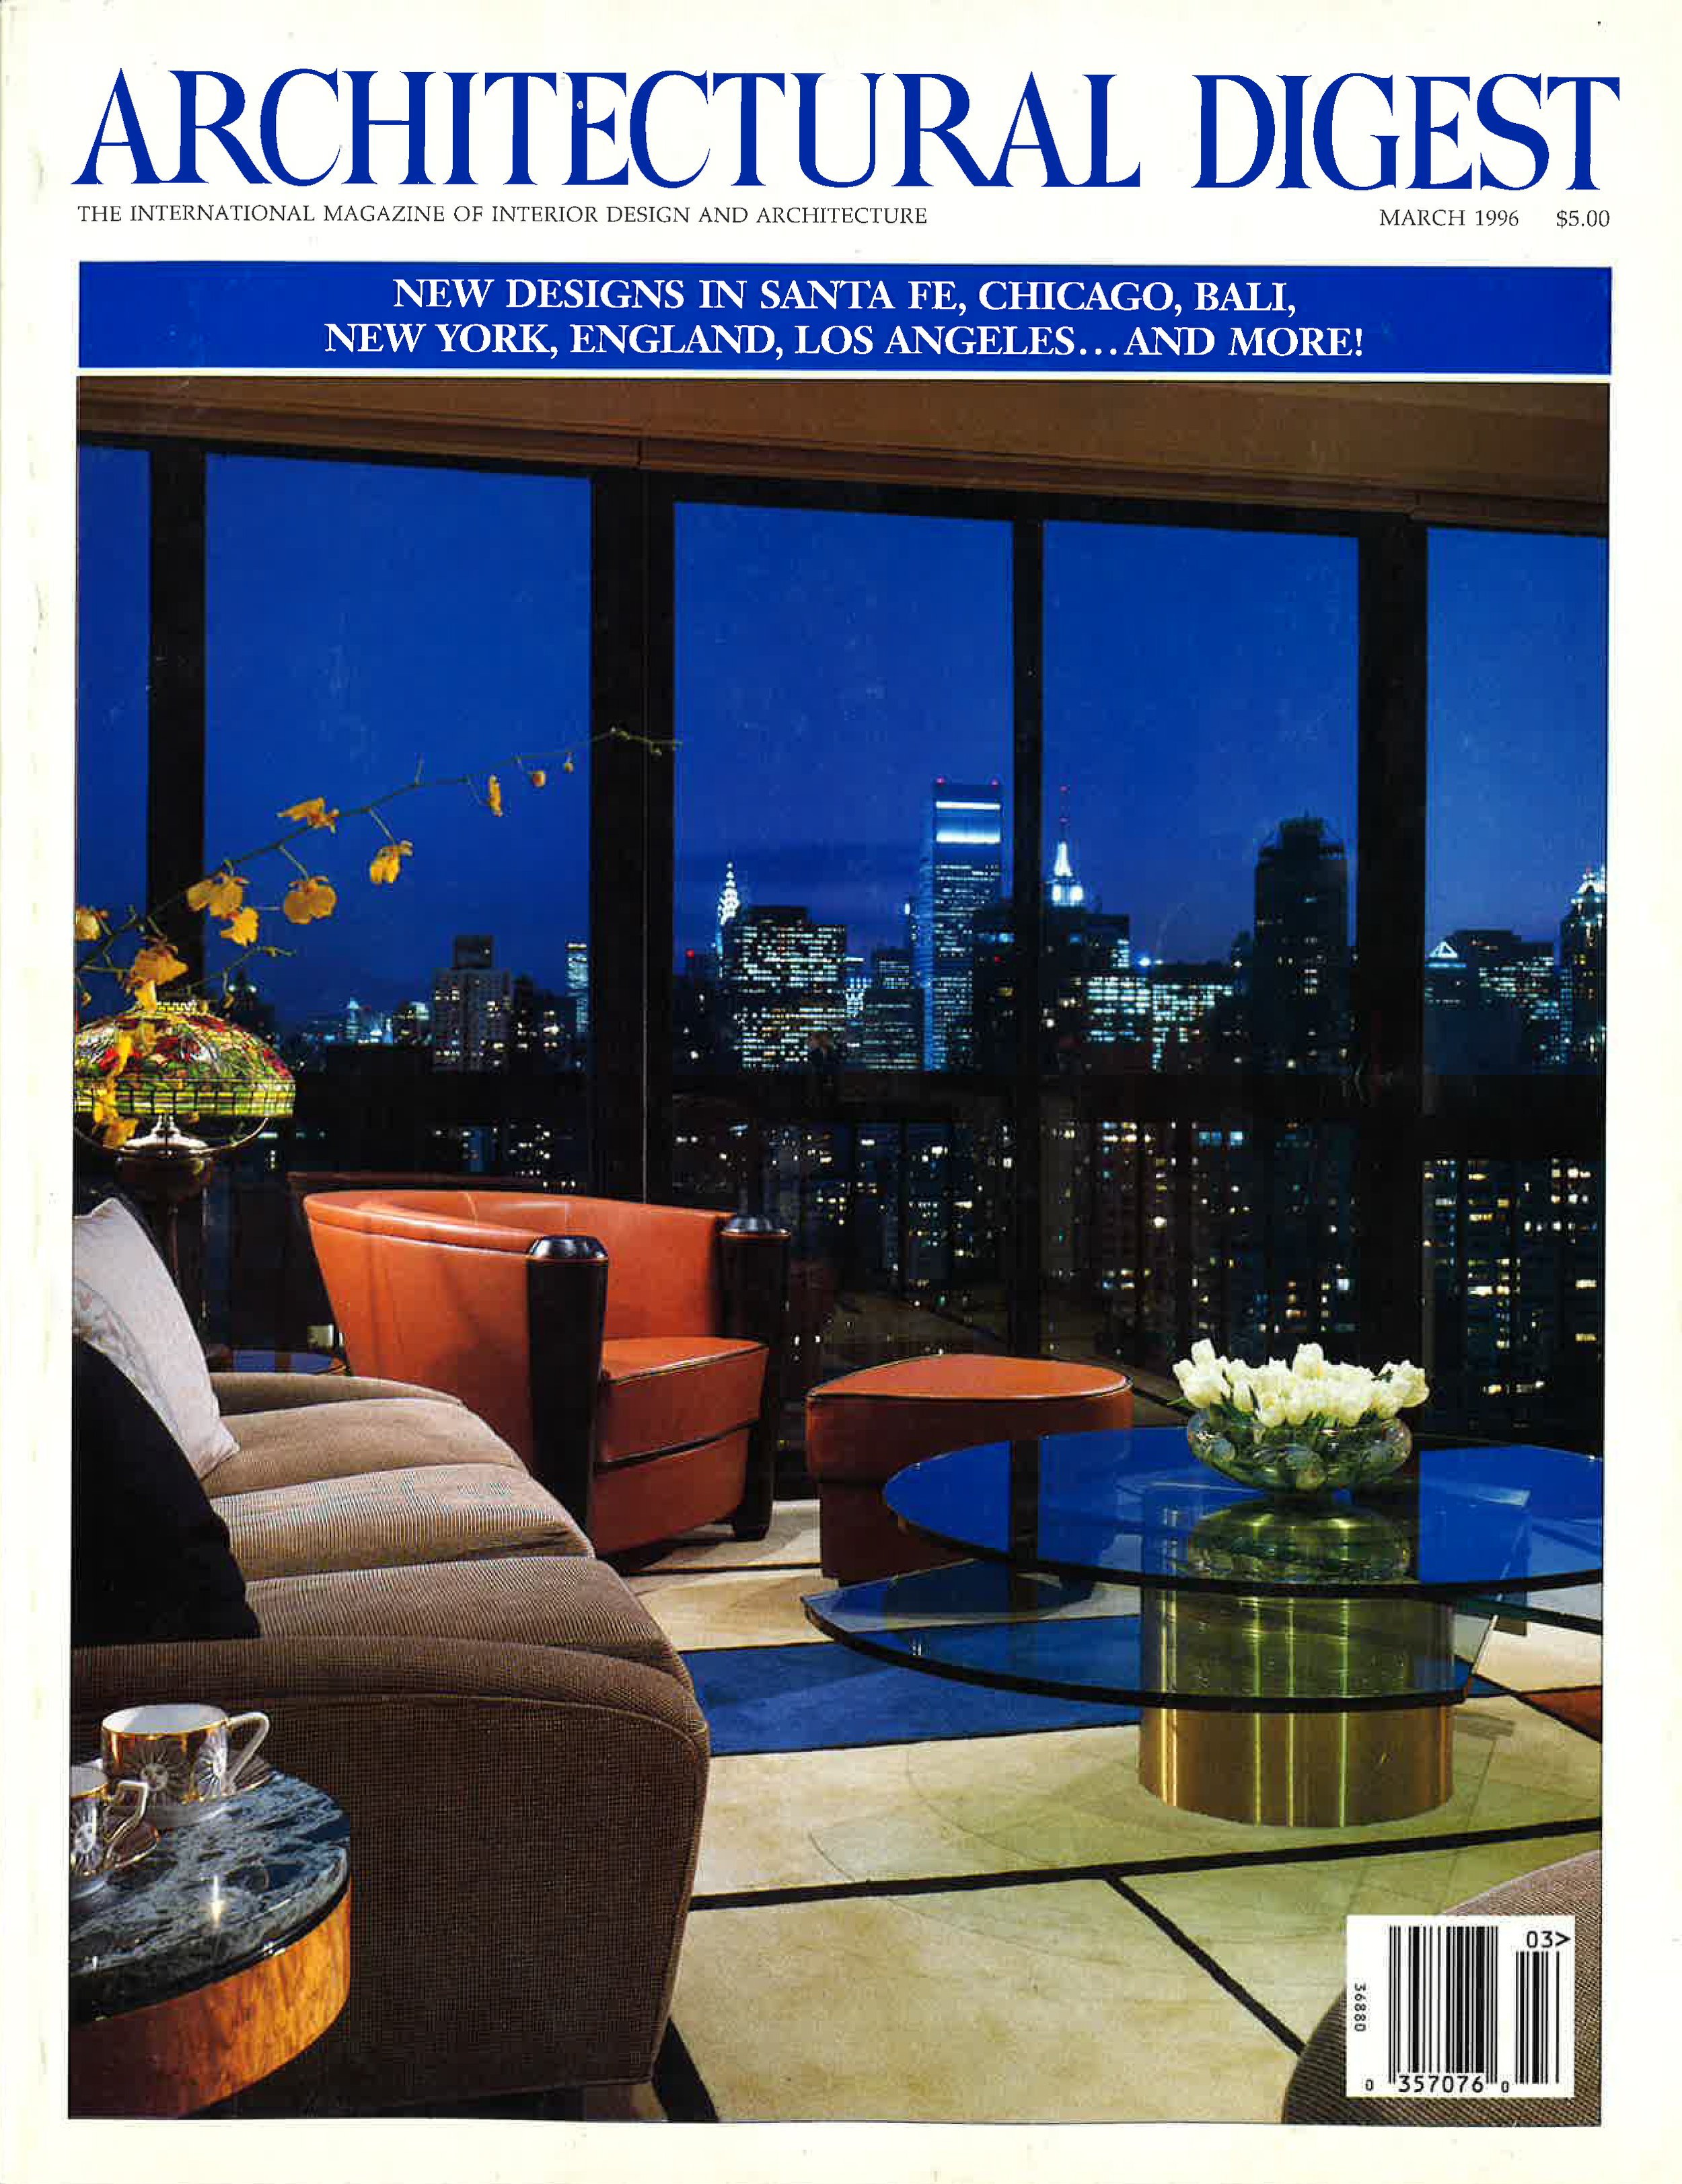 Architectural Digest - March 1996-1 copy.jpg